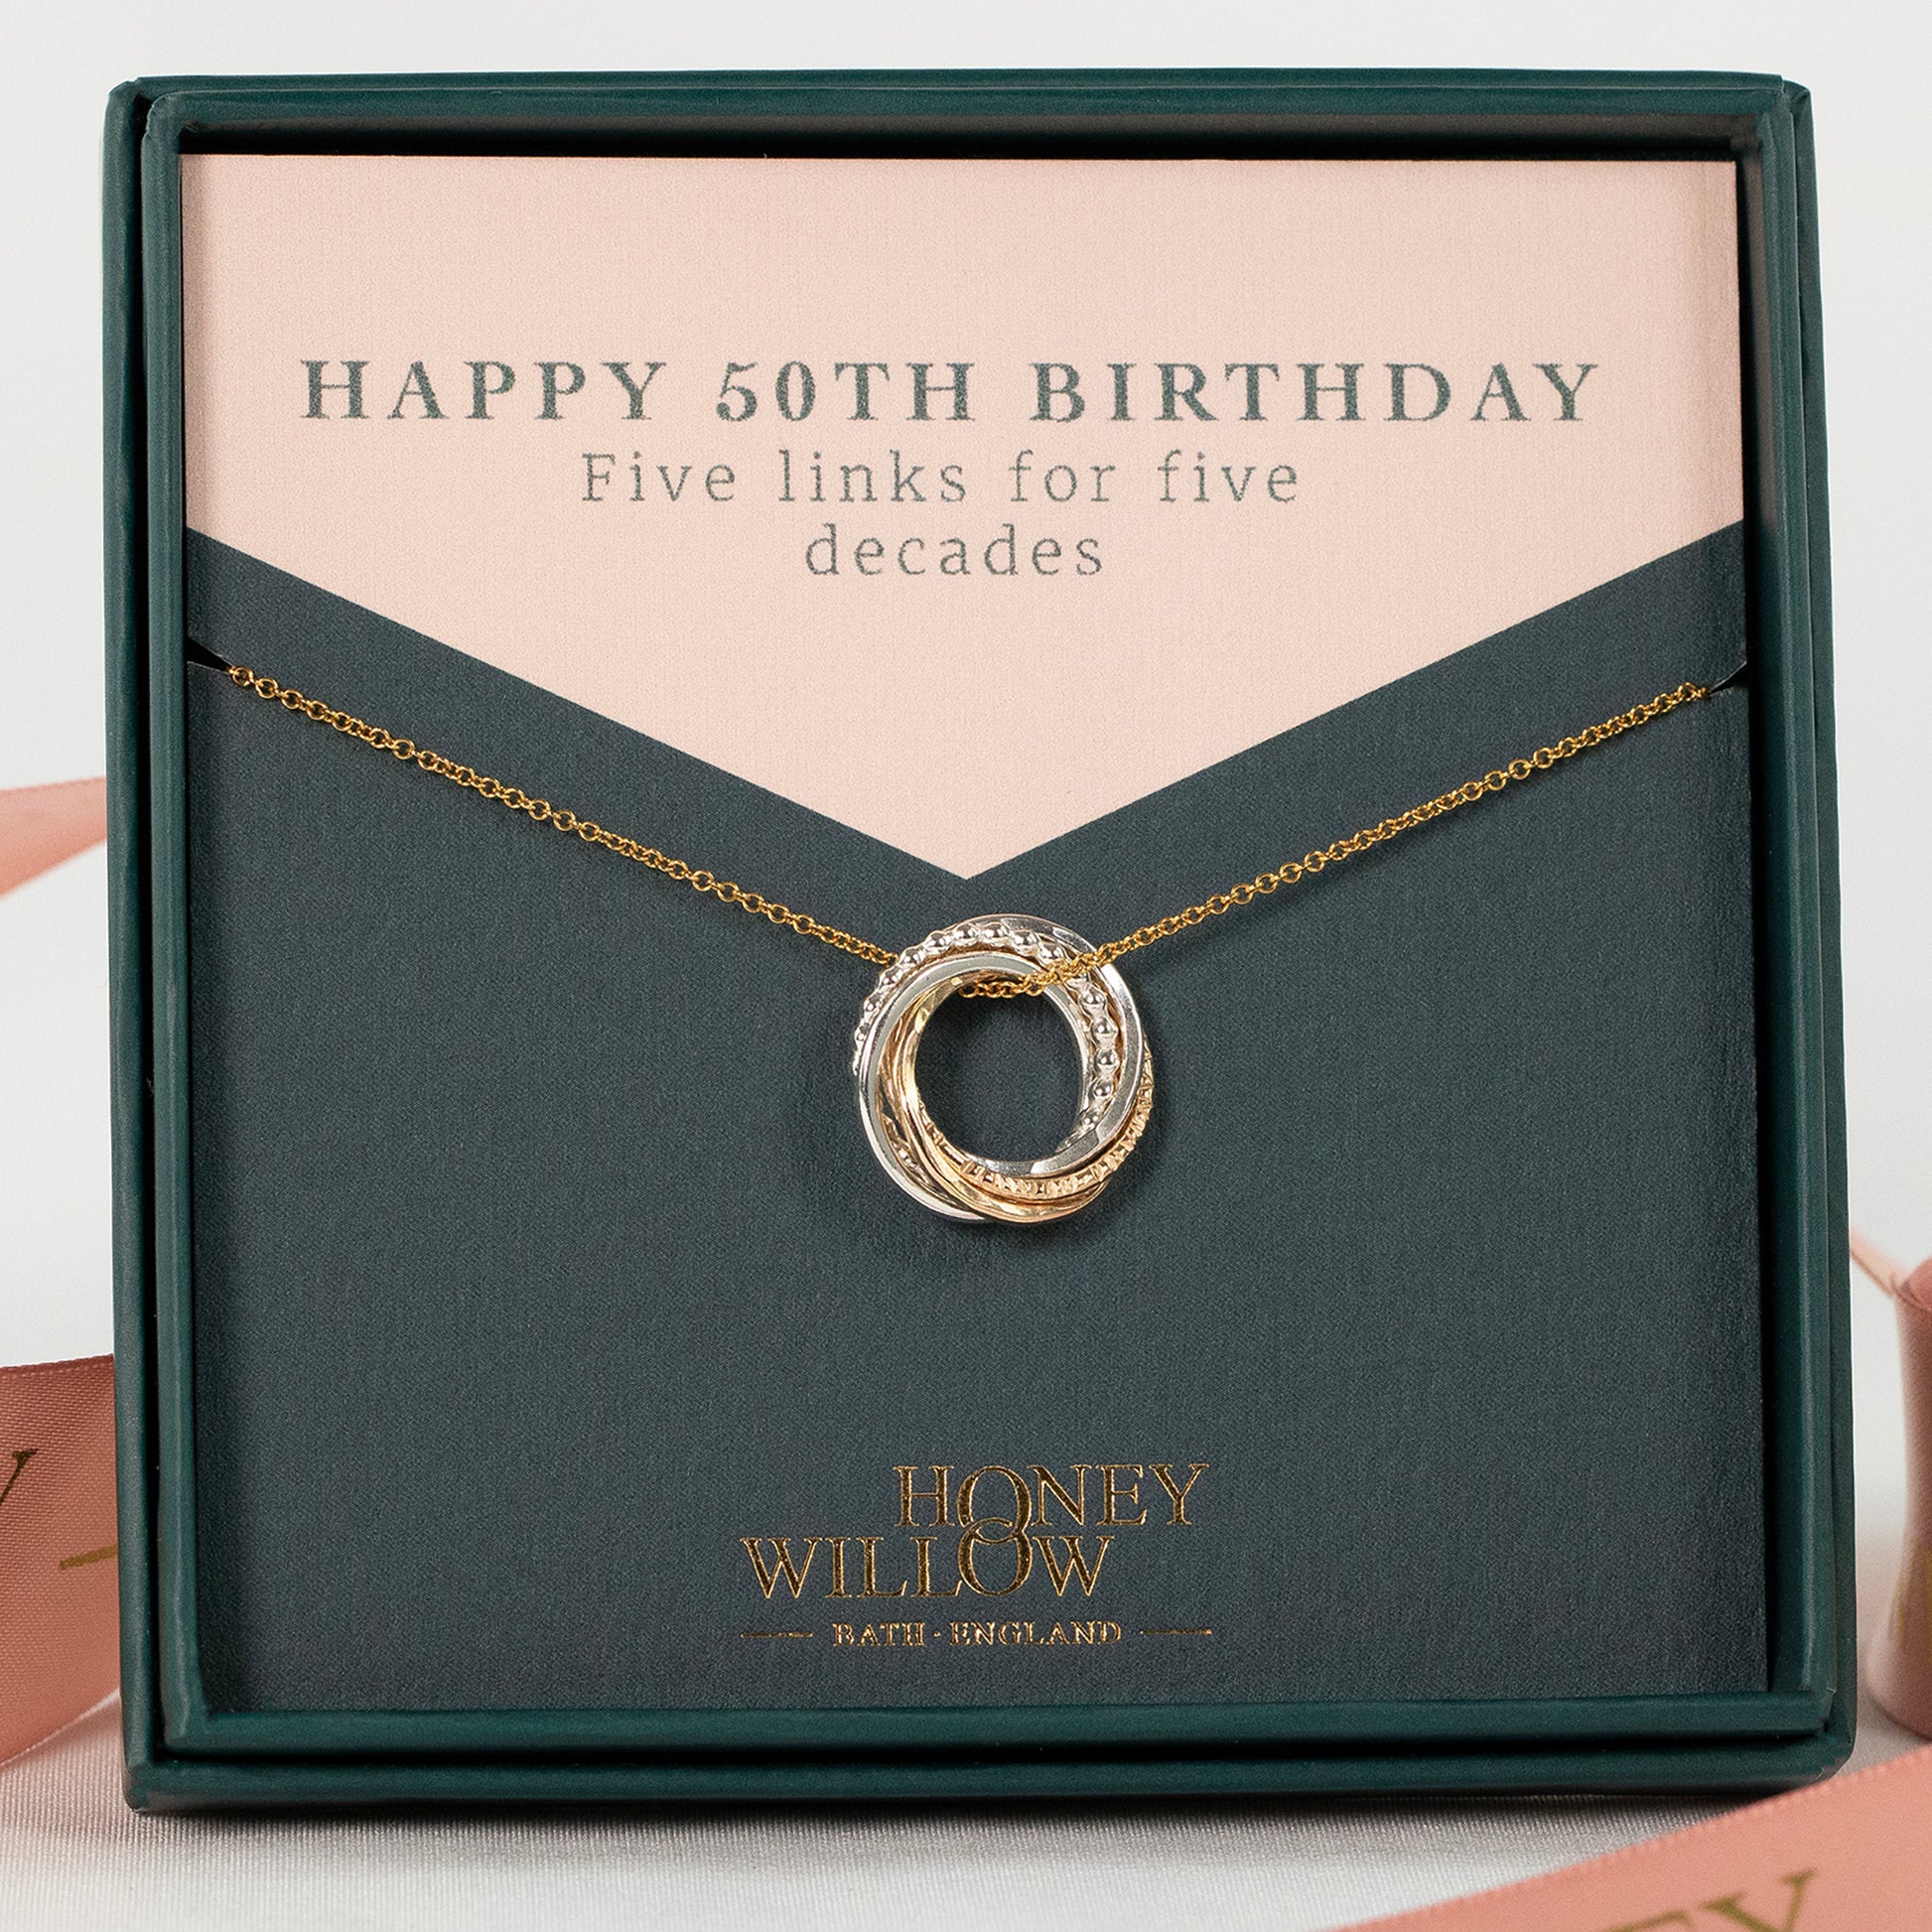 50th Birthday Necklace - The Original 5 Links for 5 Decades Necklace - Petite Silver & Gold